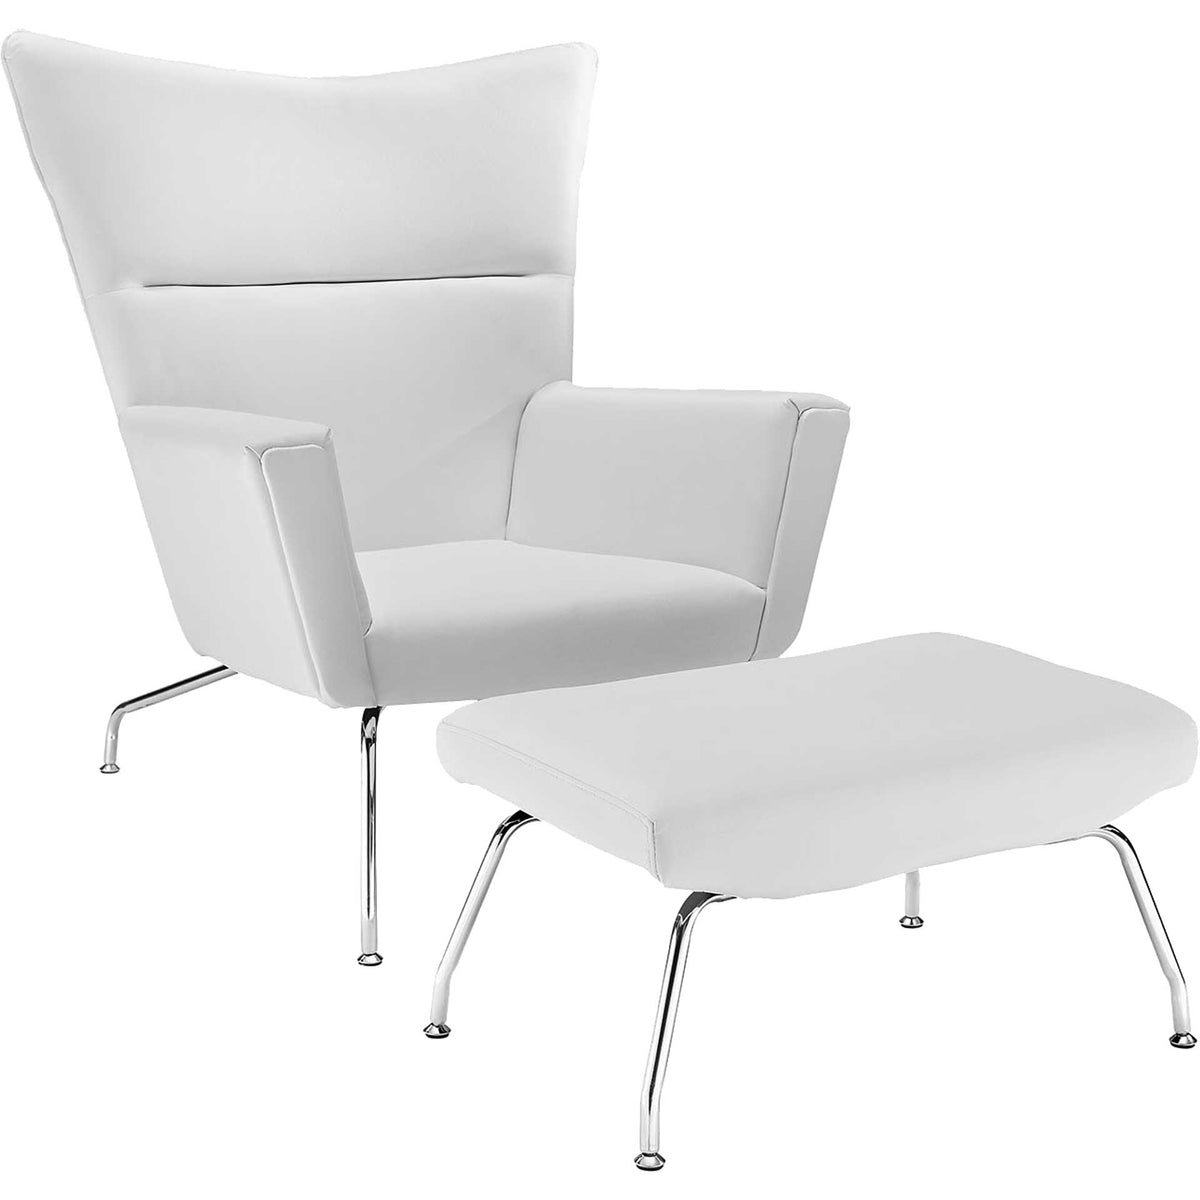 Clarell Leather Lounge Chair White